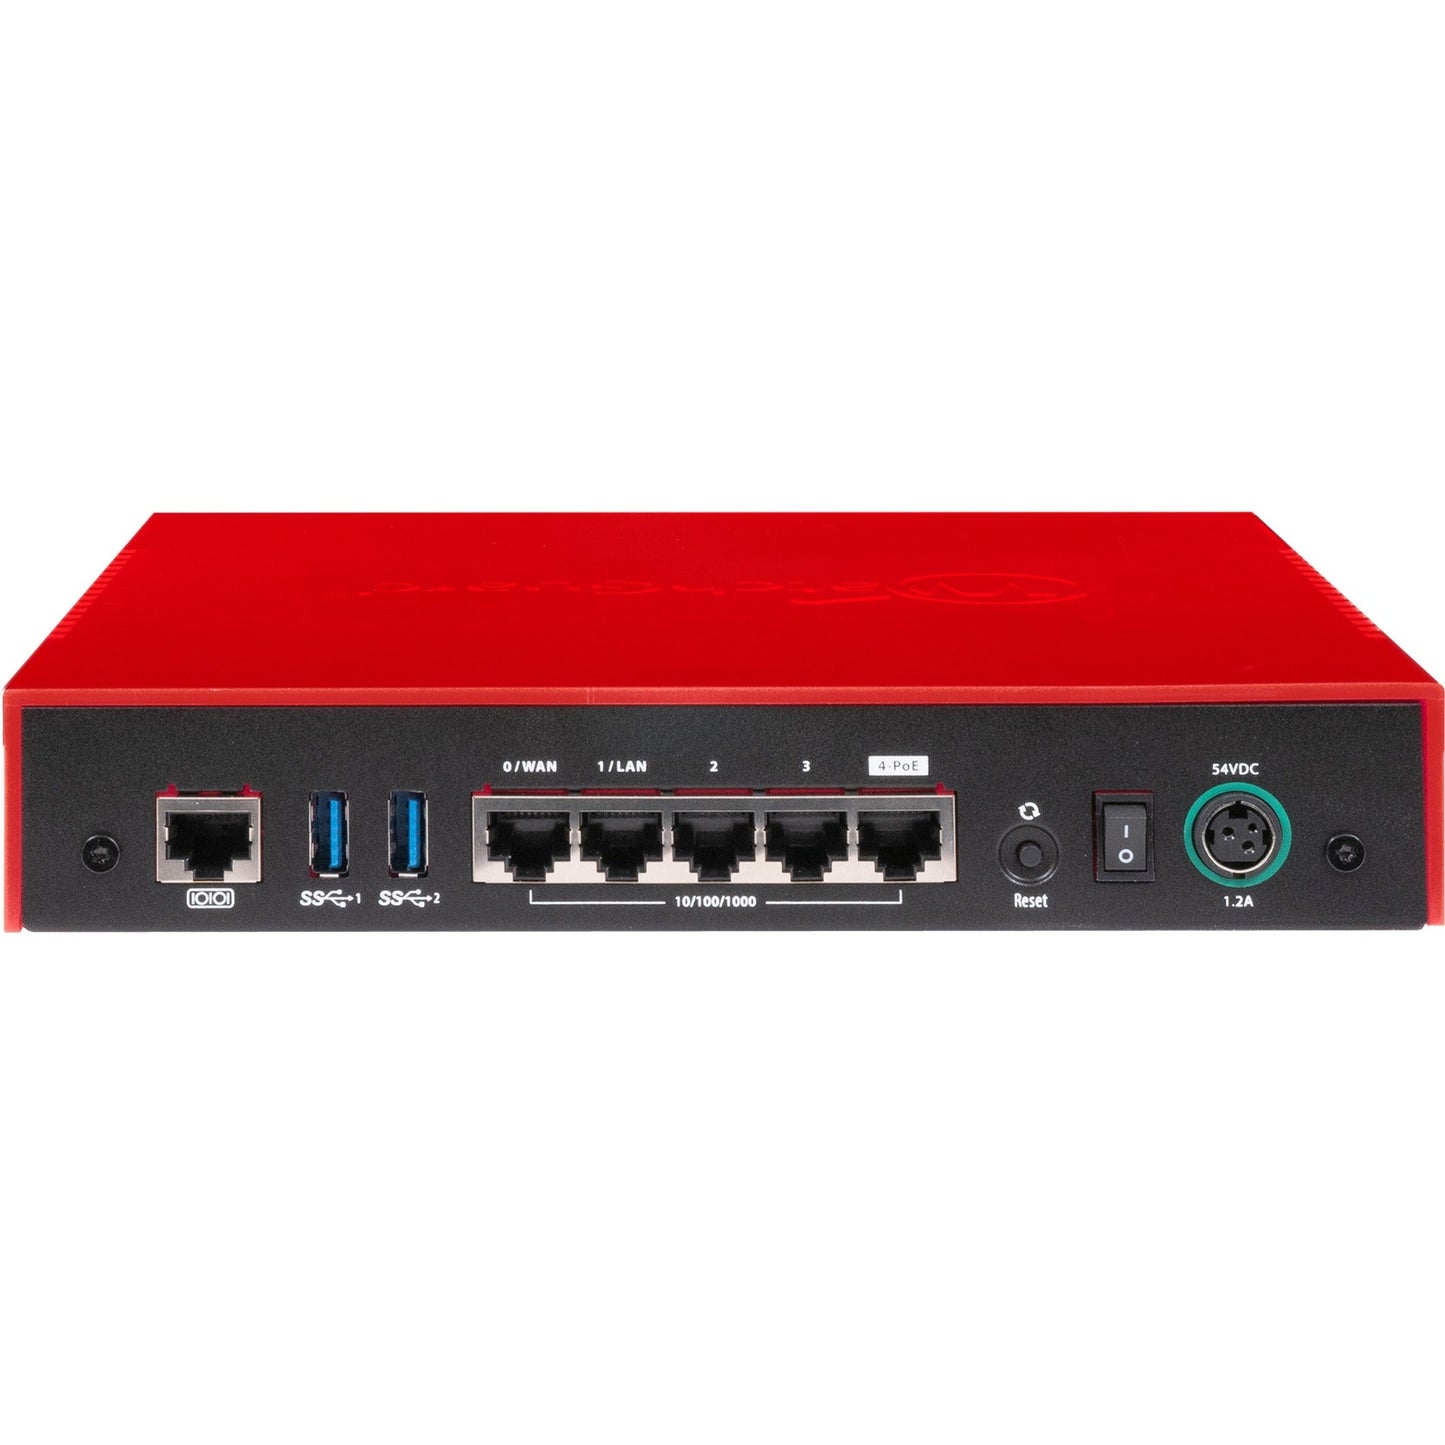 WatchGuard Trade Up to WatchGuard Firebox T40 with 1-yr Basic Security Suite (US)